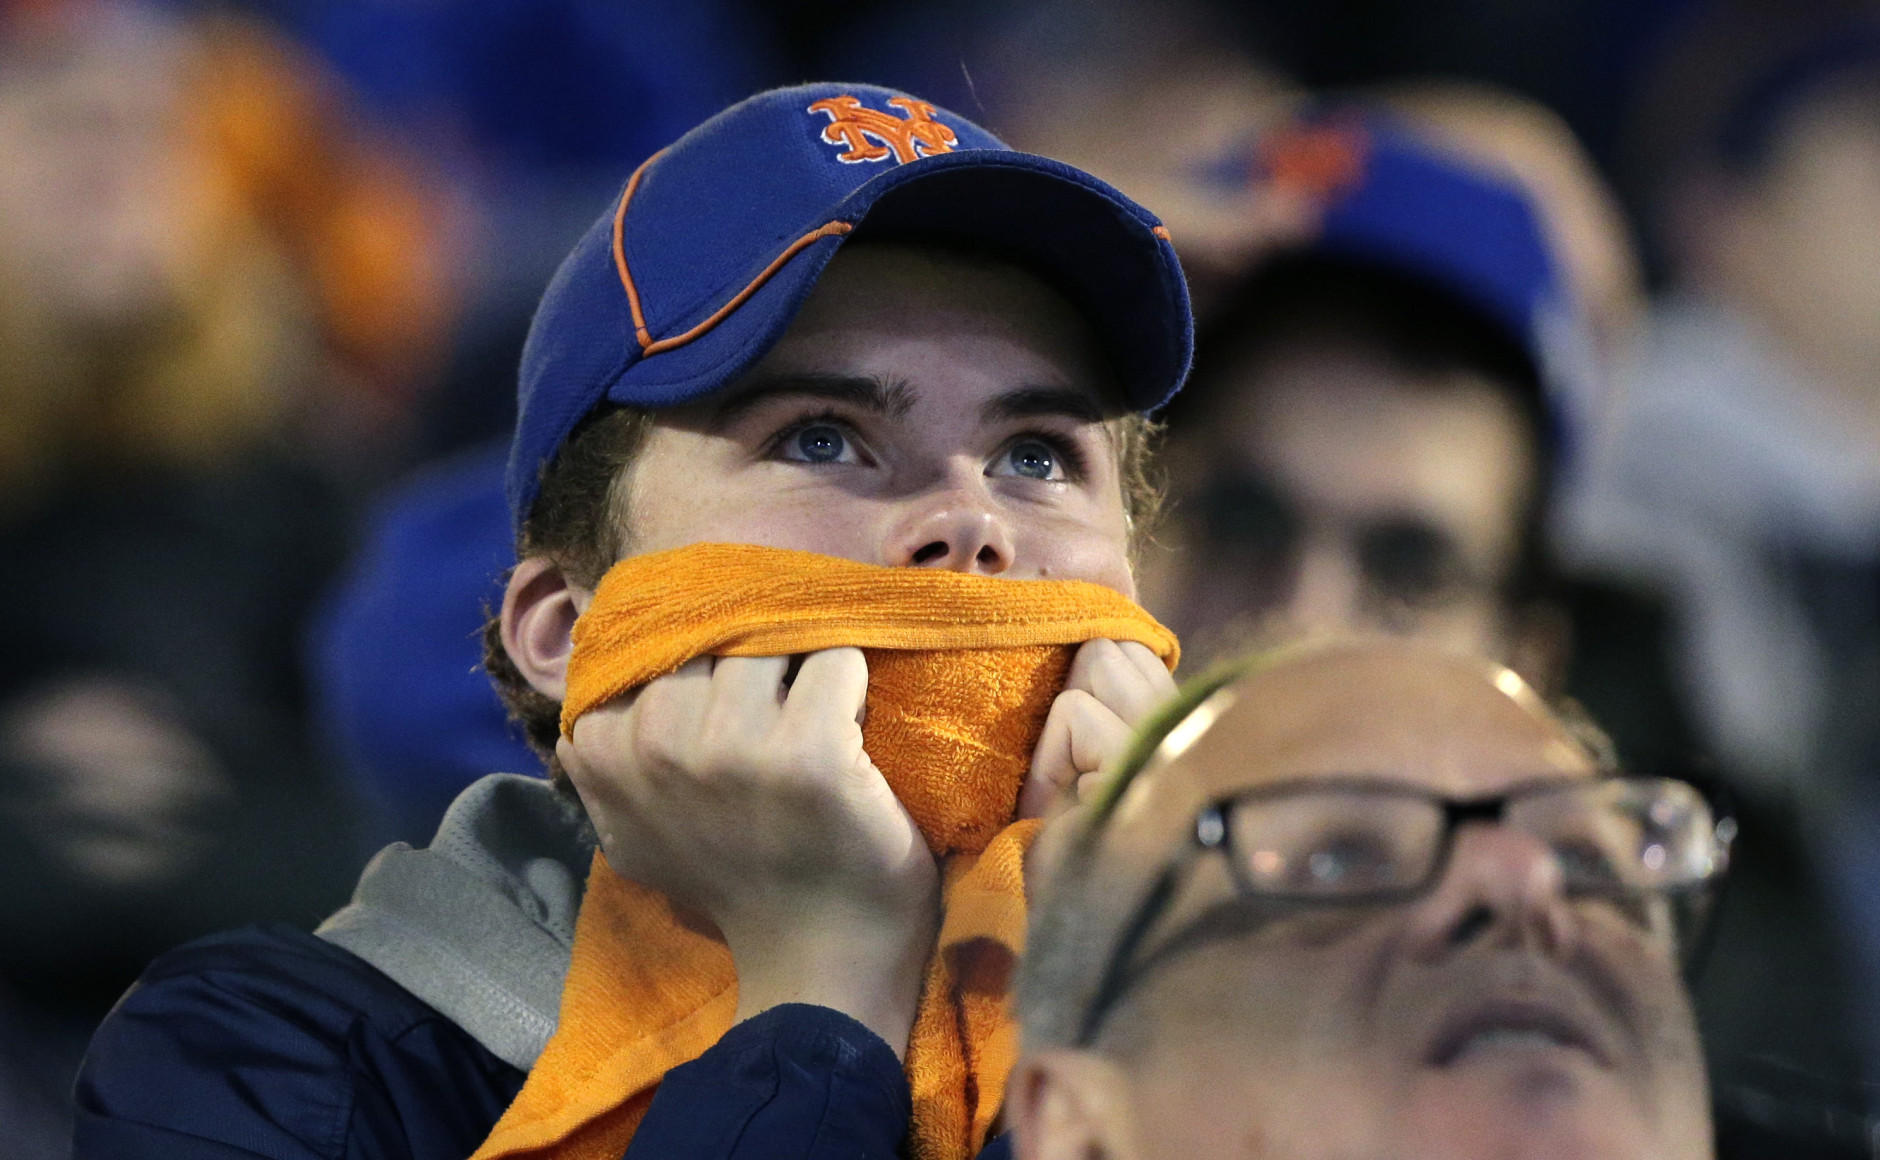 New York Mets fans watch during the 12th inning of Game 5 of the Major League Baseball World Series against the Kansas City Royals Monday, Nov. 2, 2015, in New York. (AP Photo/Peter Morgan)